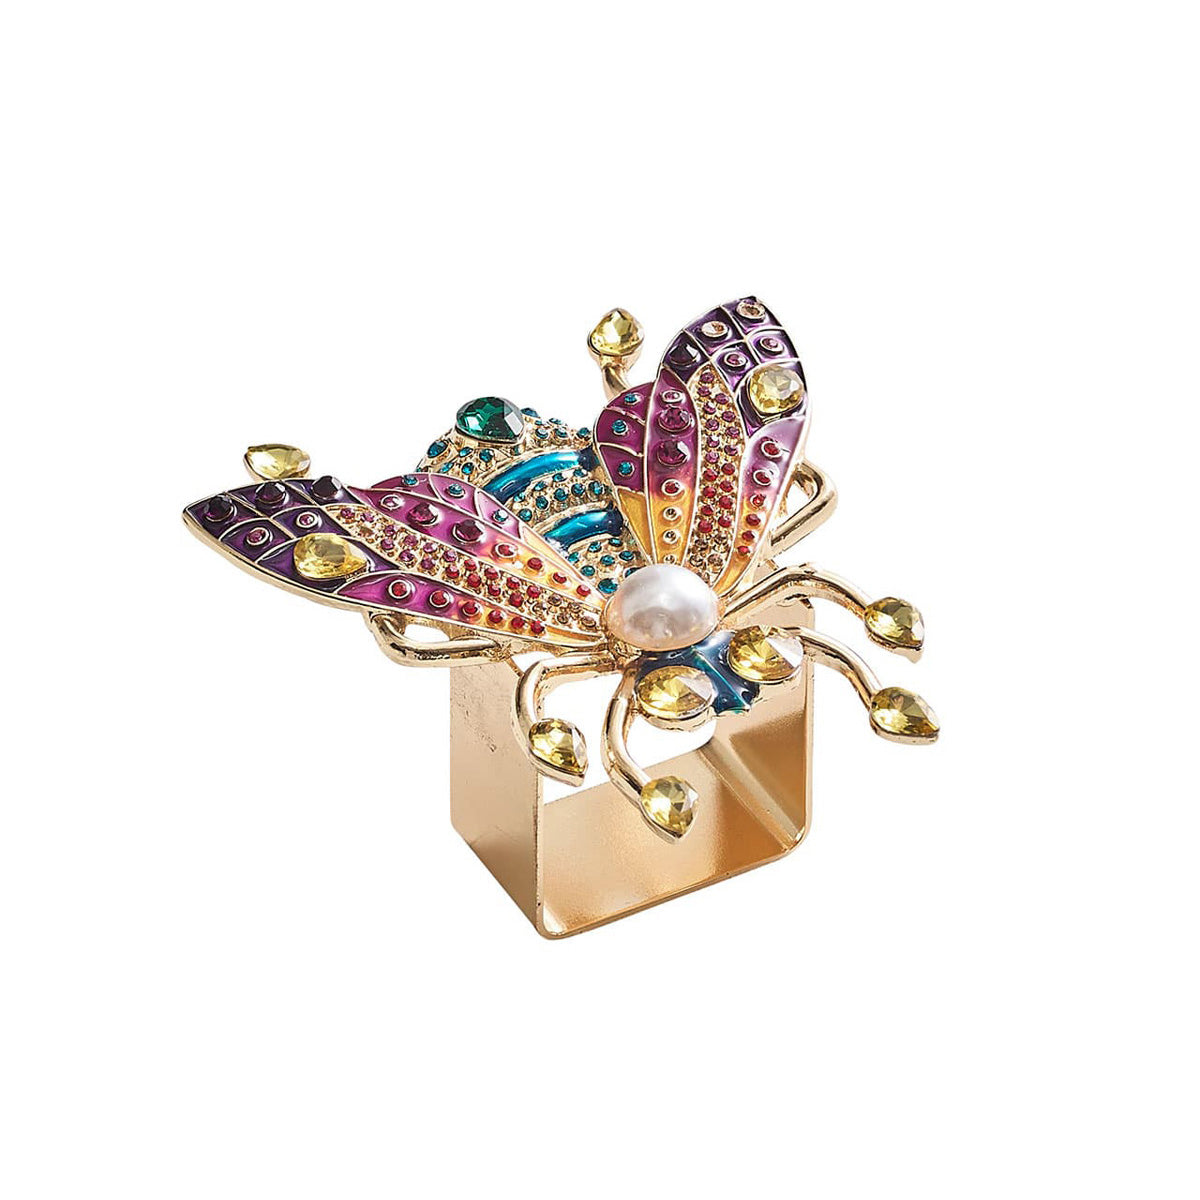 Glam Fly Napkin Ring - Set of 4 in a Gift Box by Kim Seybert Additional Image-4